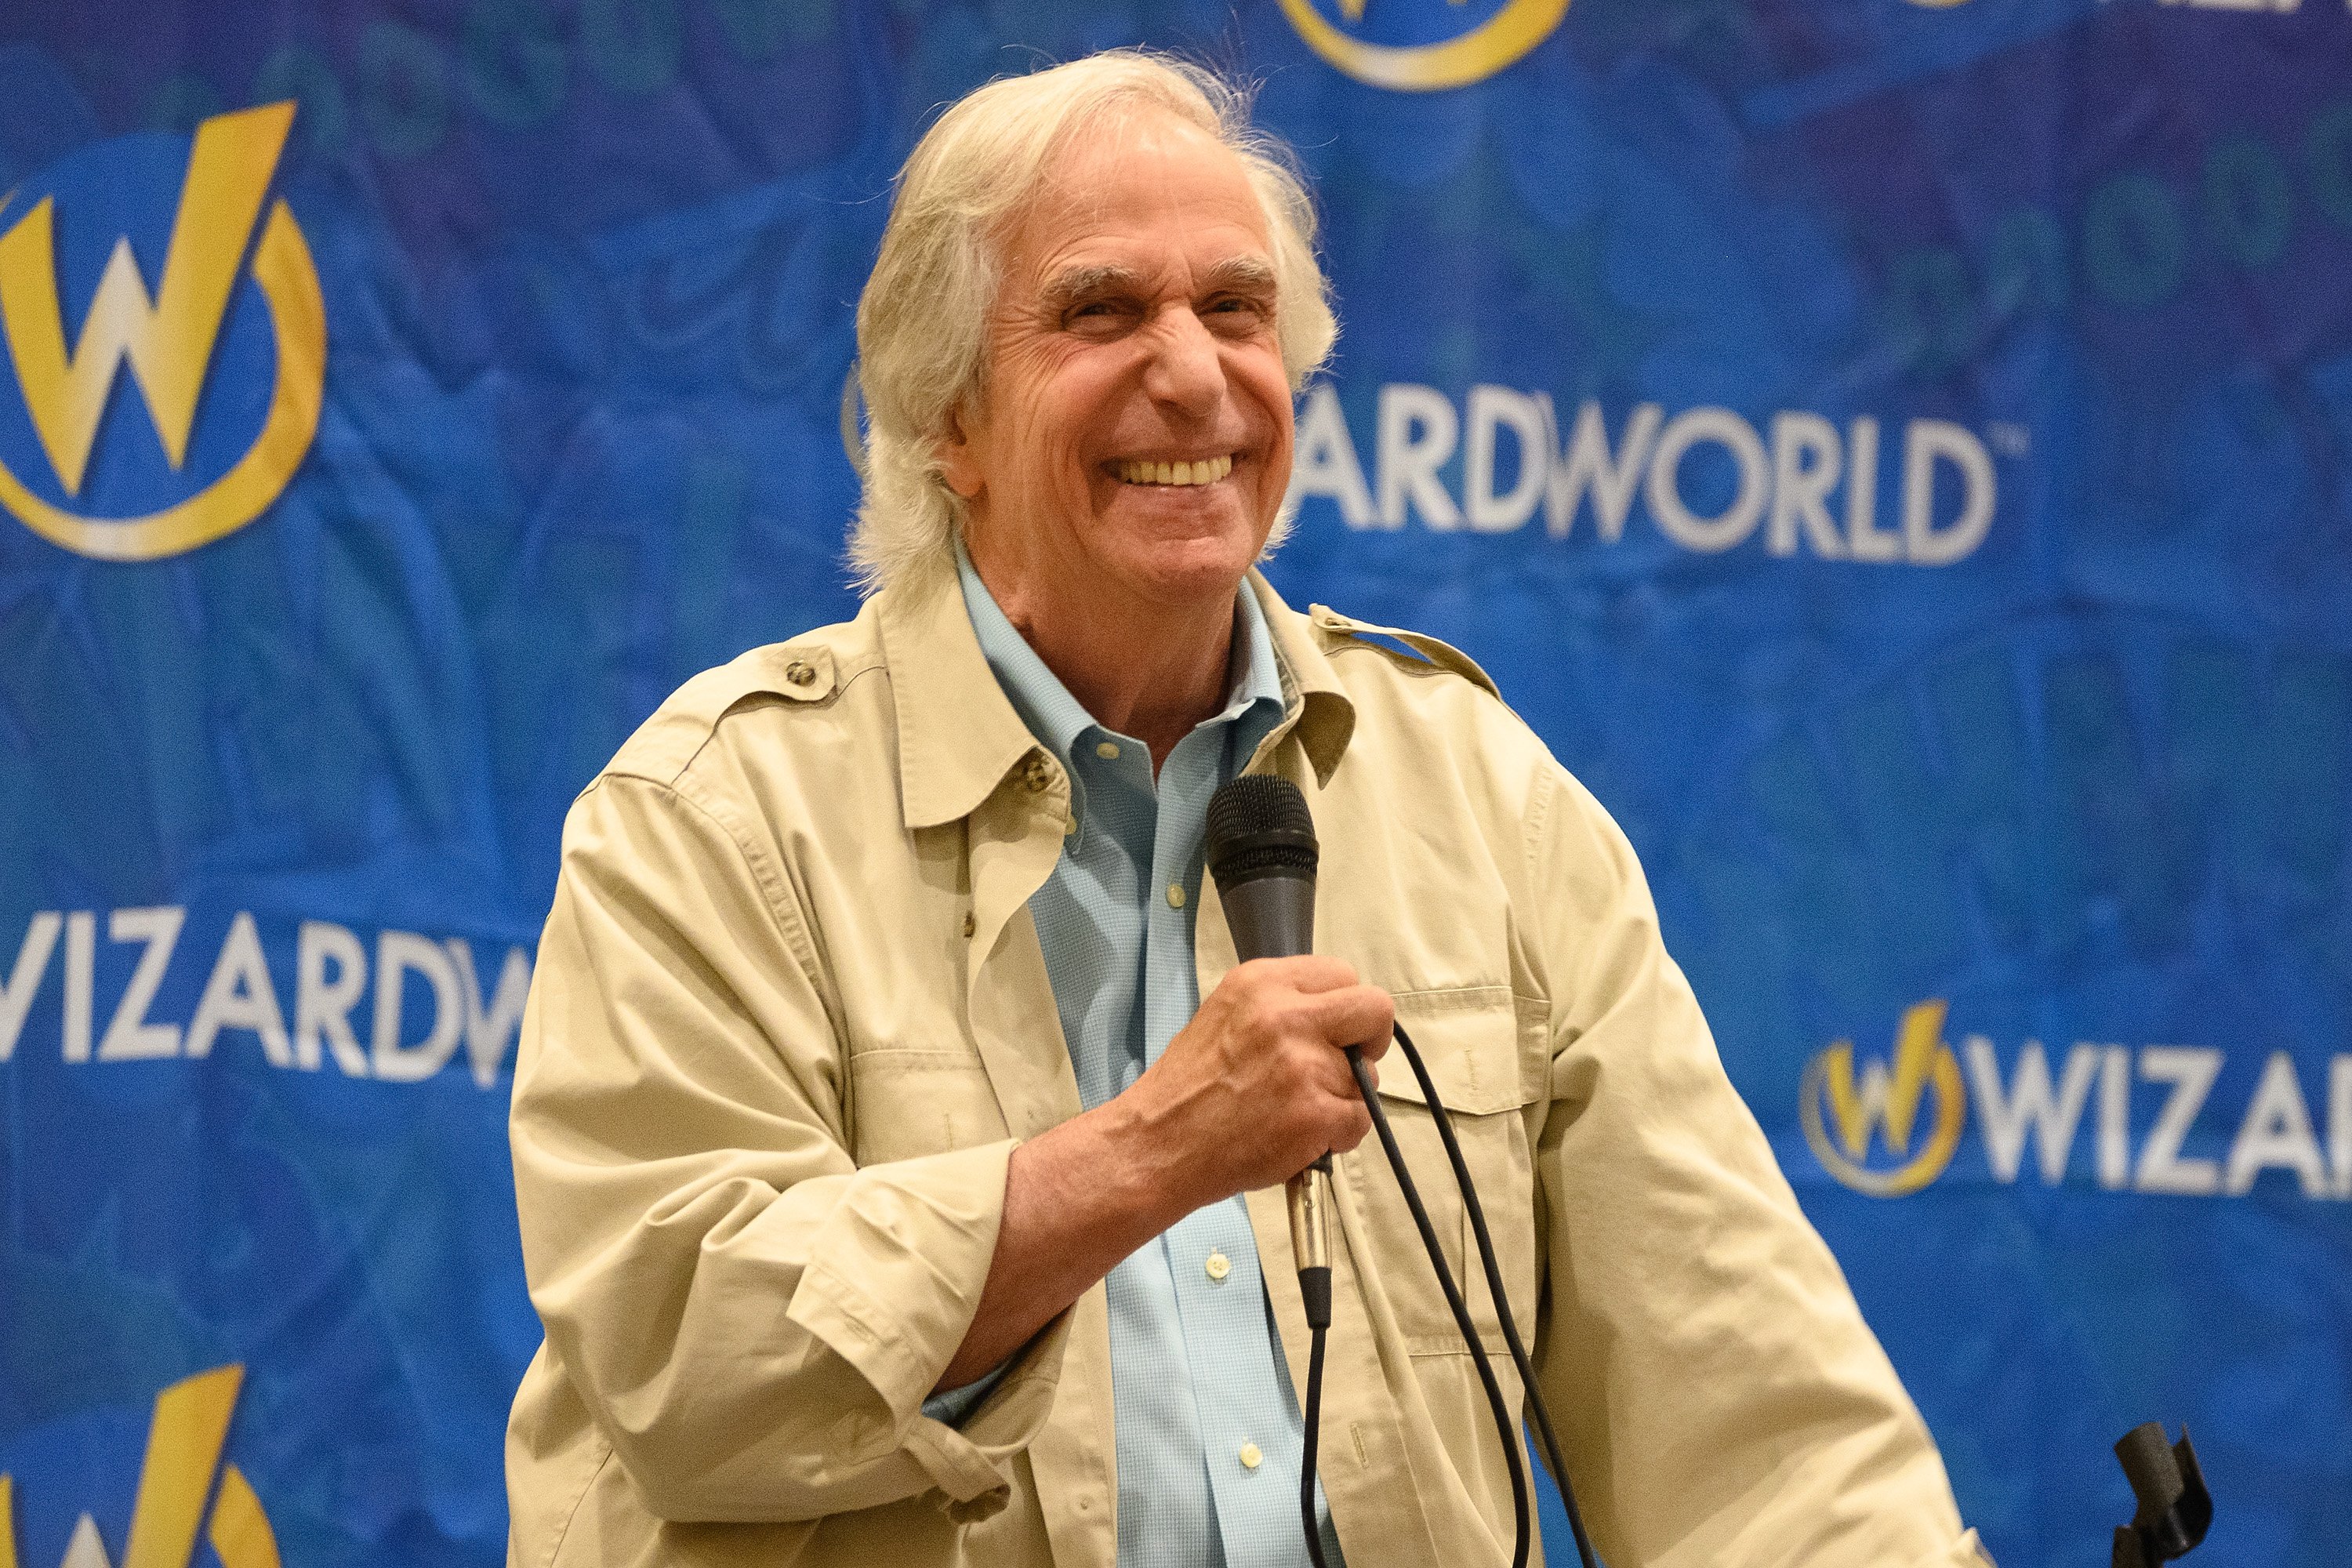 Henry Winkler attends Wizard World Comic Con Chicago | Source: Getty Images